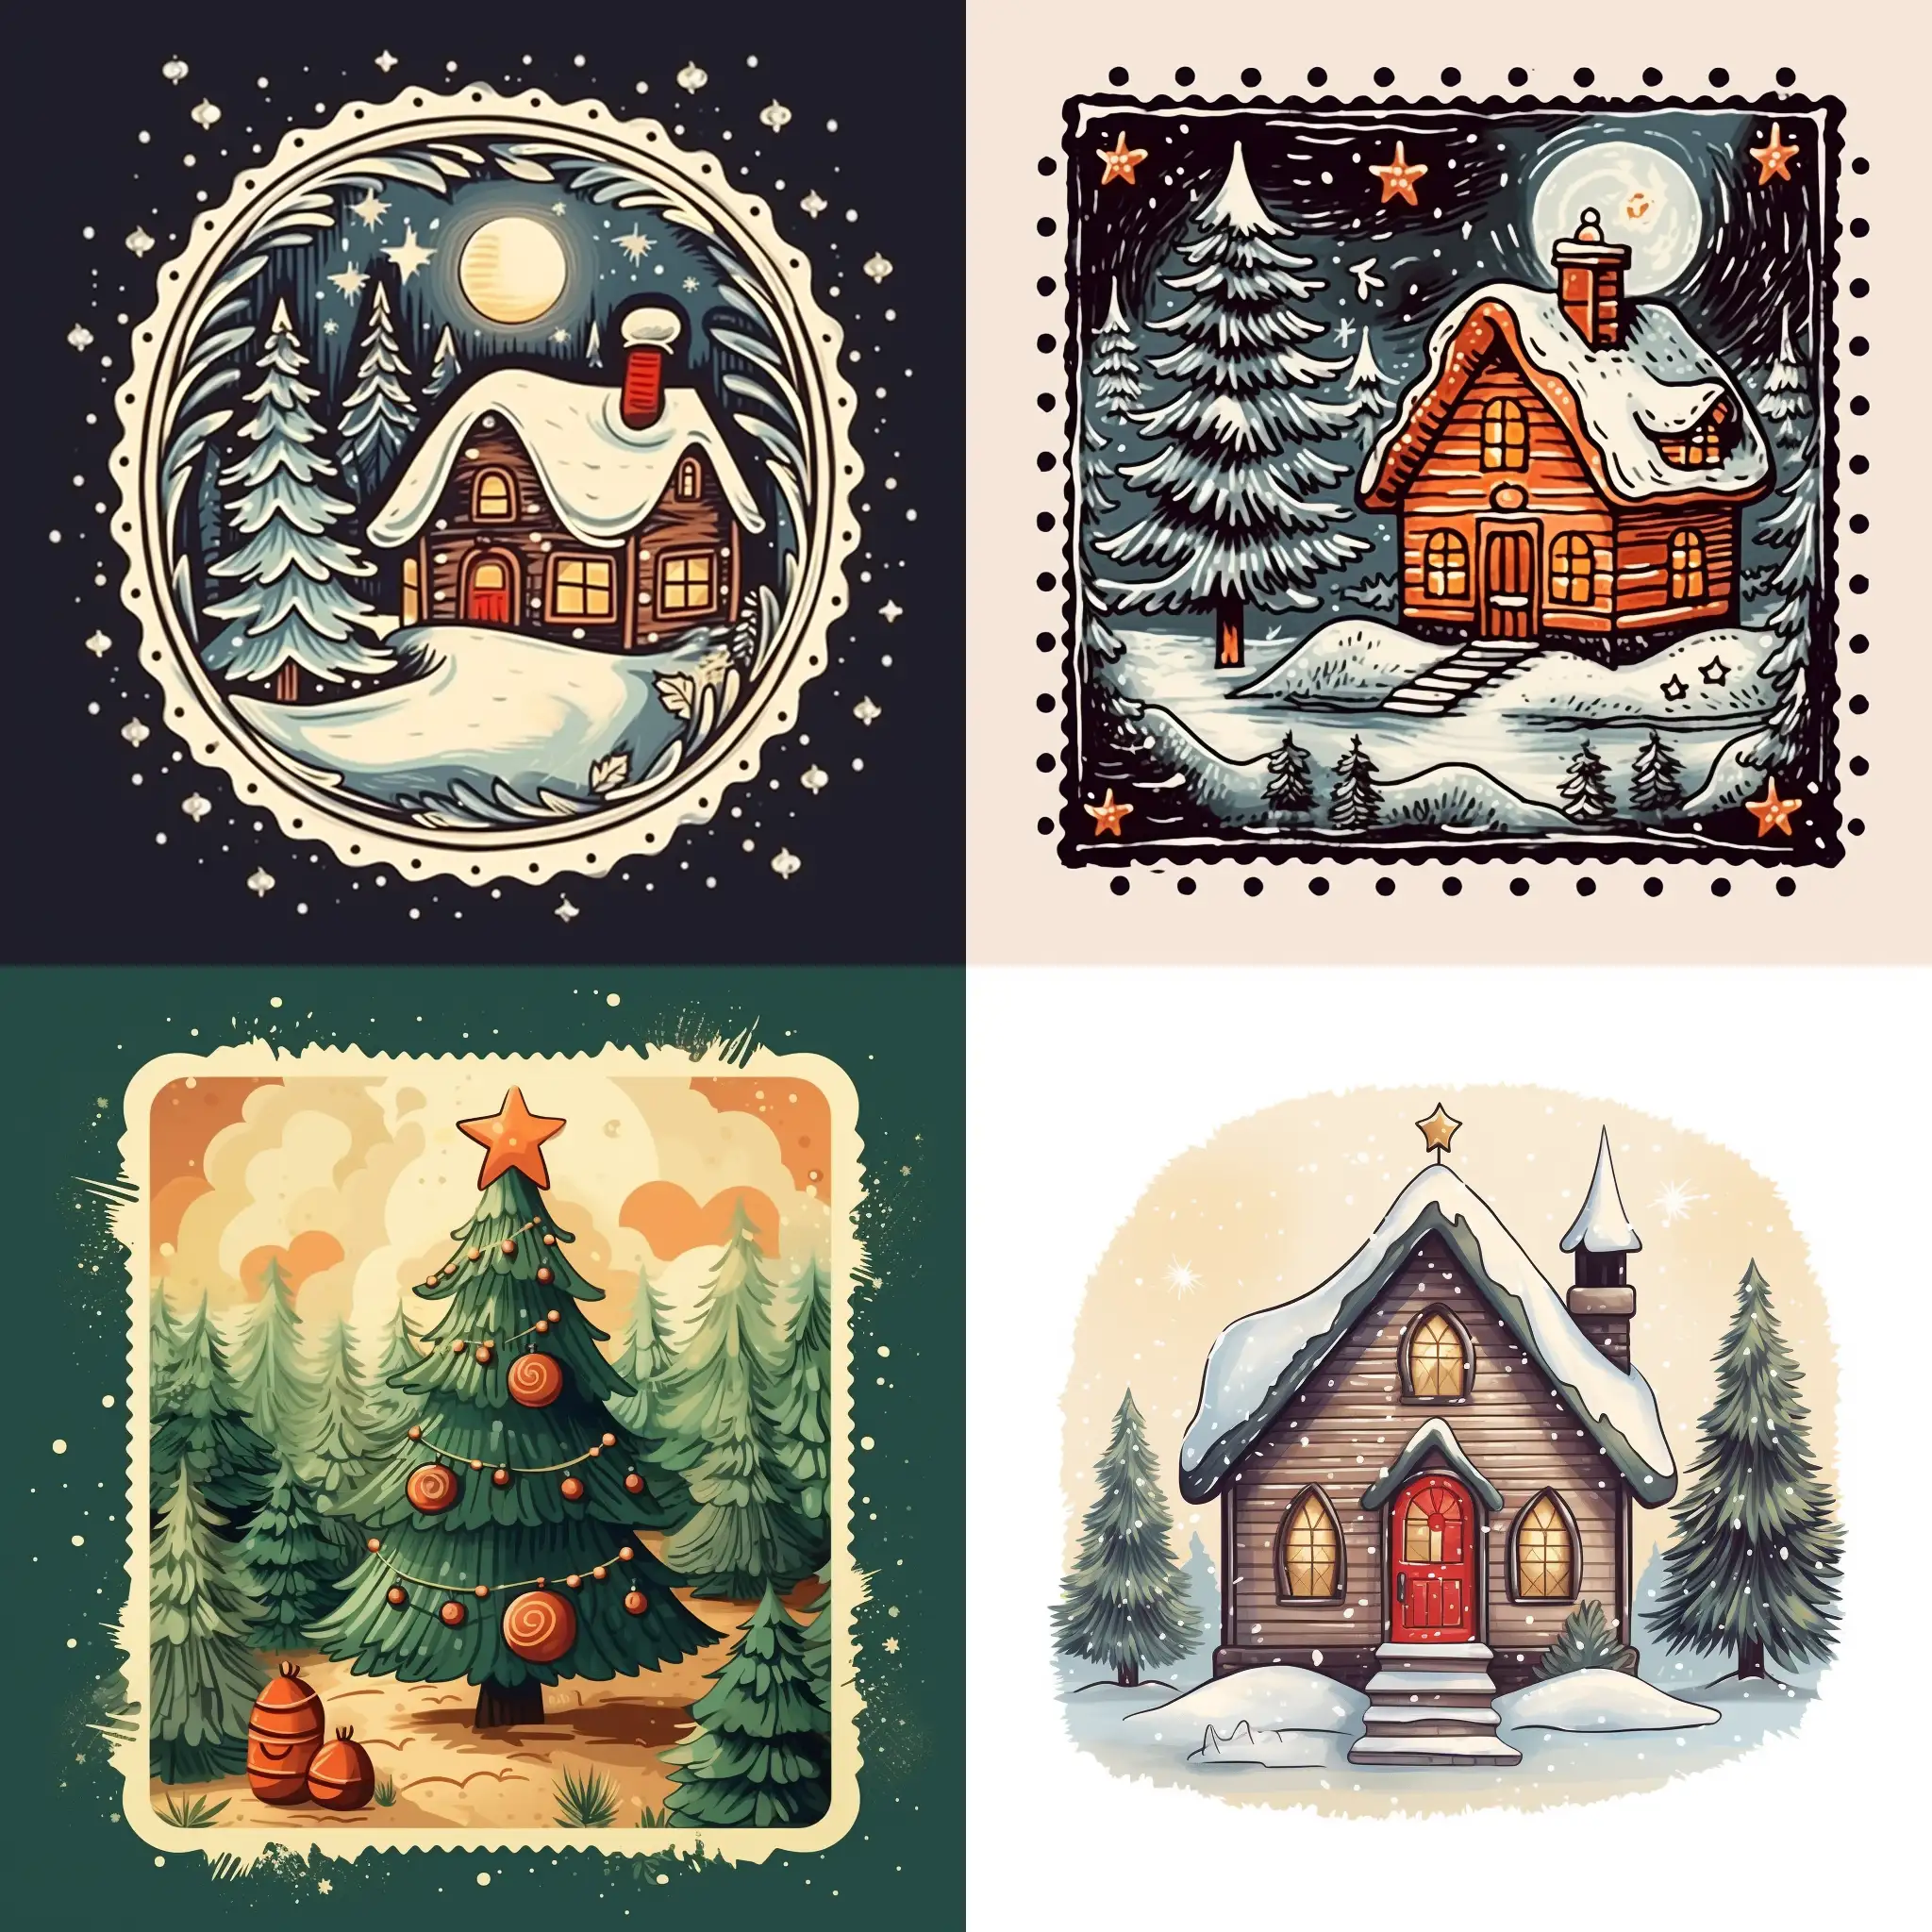 Christmas-Post-Stamp-Illustration-with-Festive-Cheer